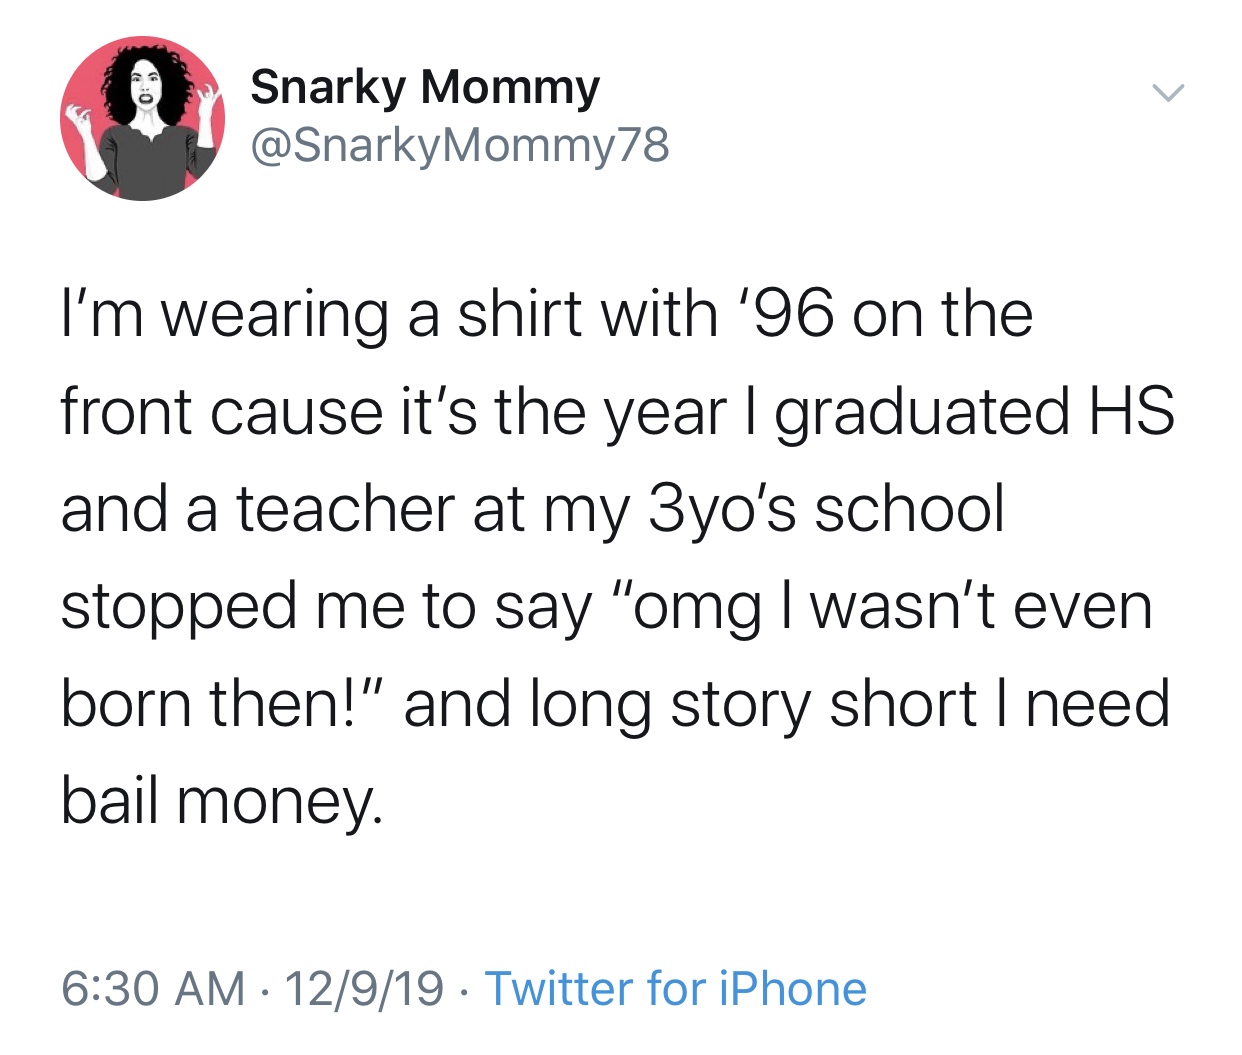 Snarky Mommy I'm wearing a shirt with '96 on the front cause it's the year I graduated Hs and a teacher at my 3yo's school stopped me to say "omg I wasn't even born then!" and long story short I need bail money. 12919 Twitter for iPhone